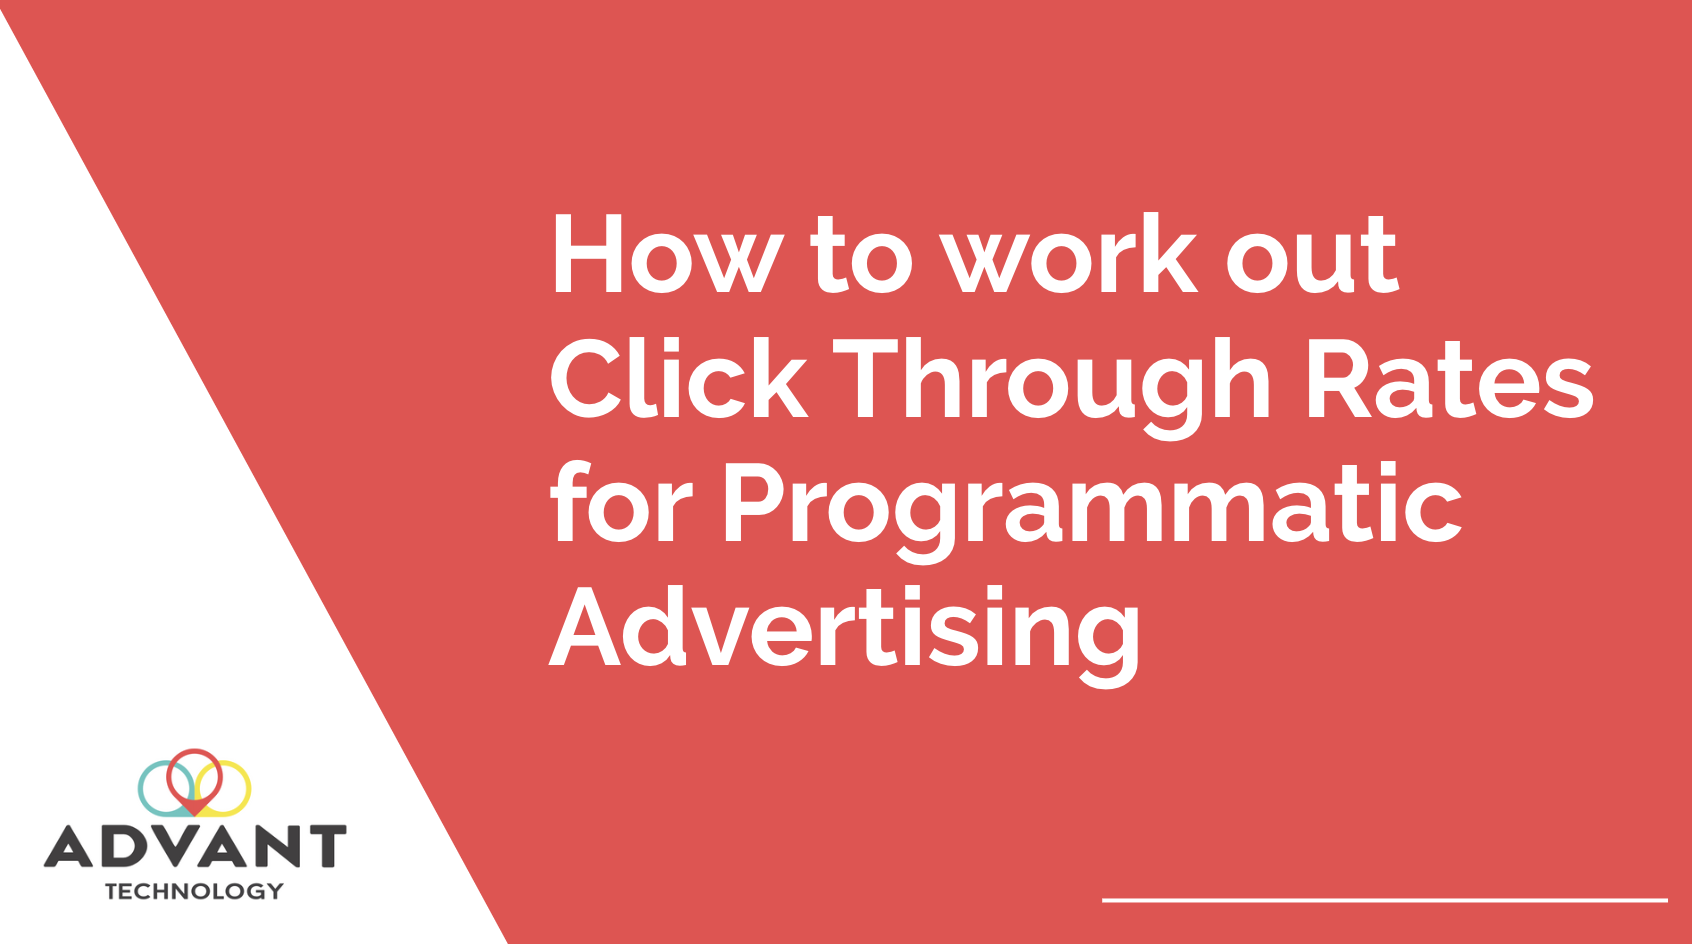 Click Through Rates for Programmatic Advertising